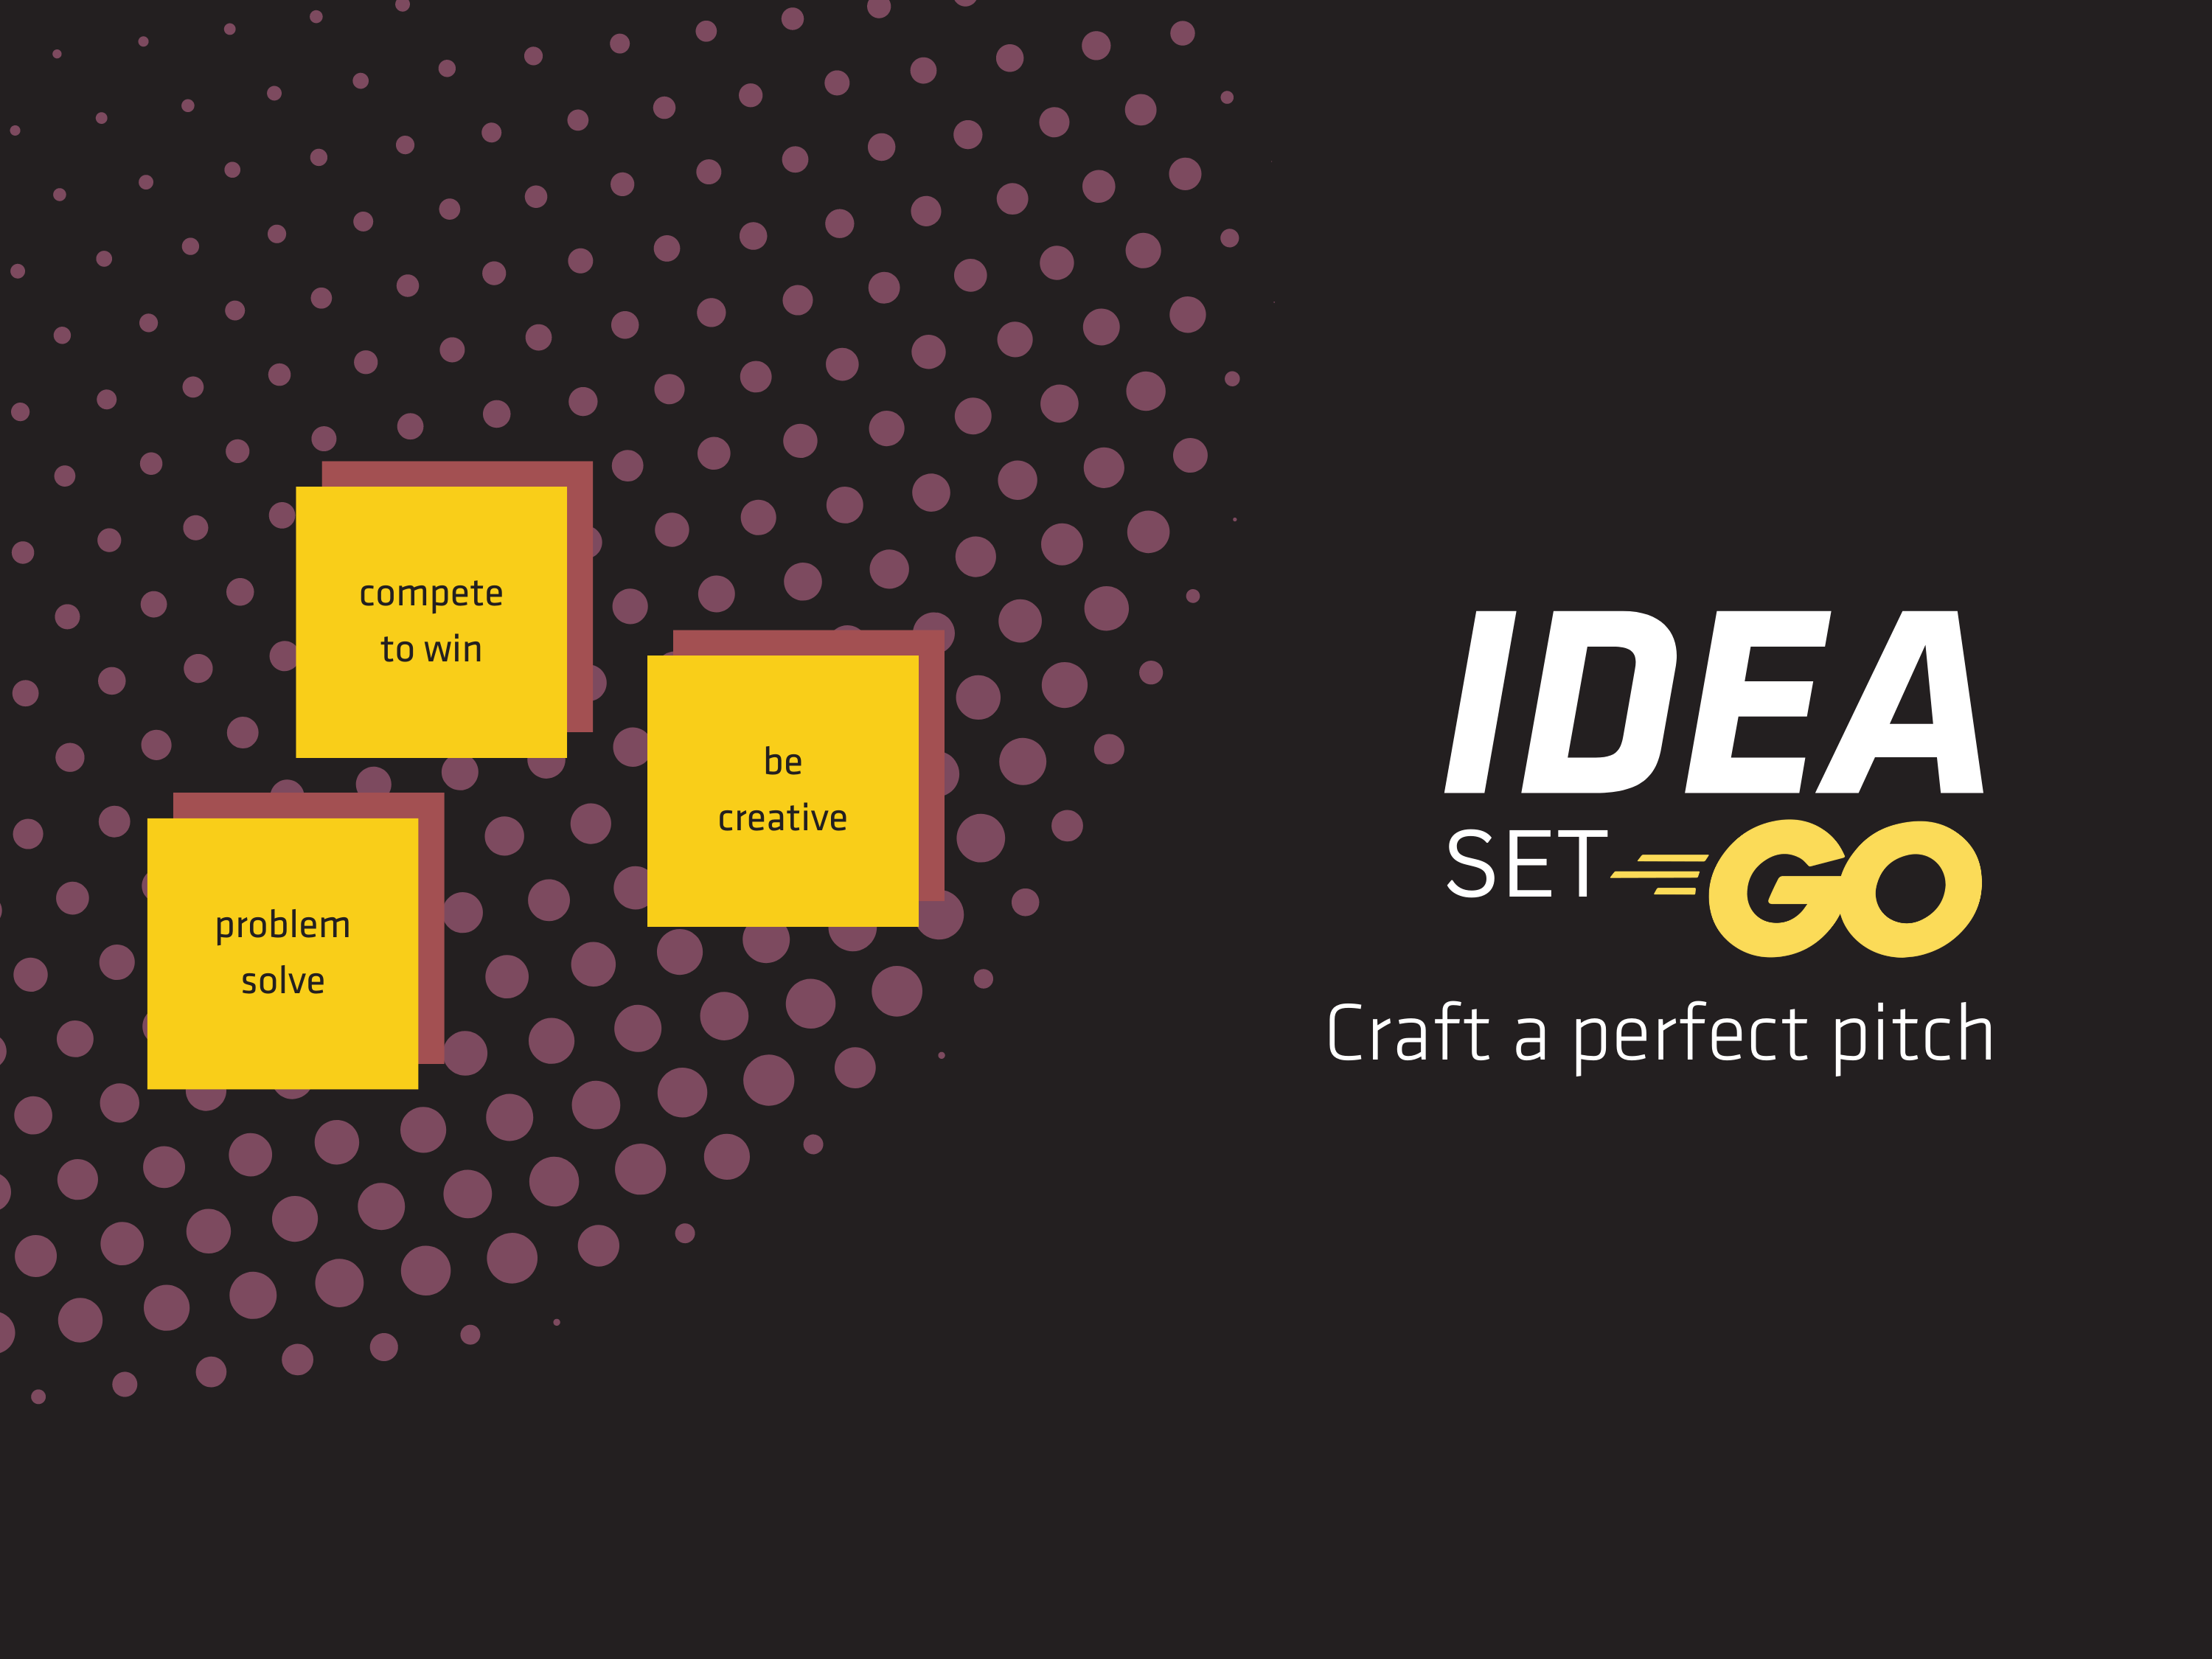 "Compete to Win", "Problem Solve", and "Be Creative" on sticky notes and "Idea Set Go. Craft a perfect pitch" over a blank expanse.